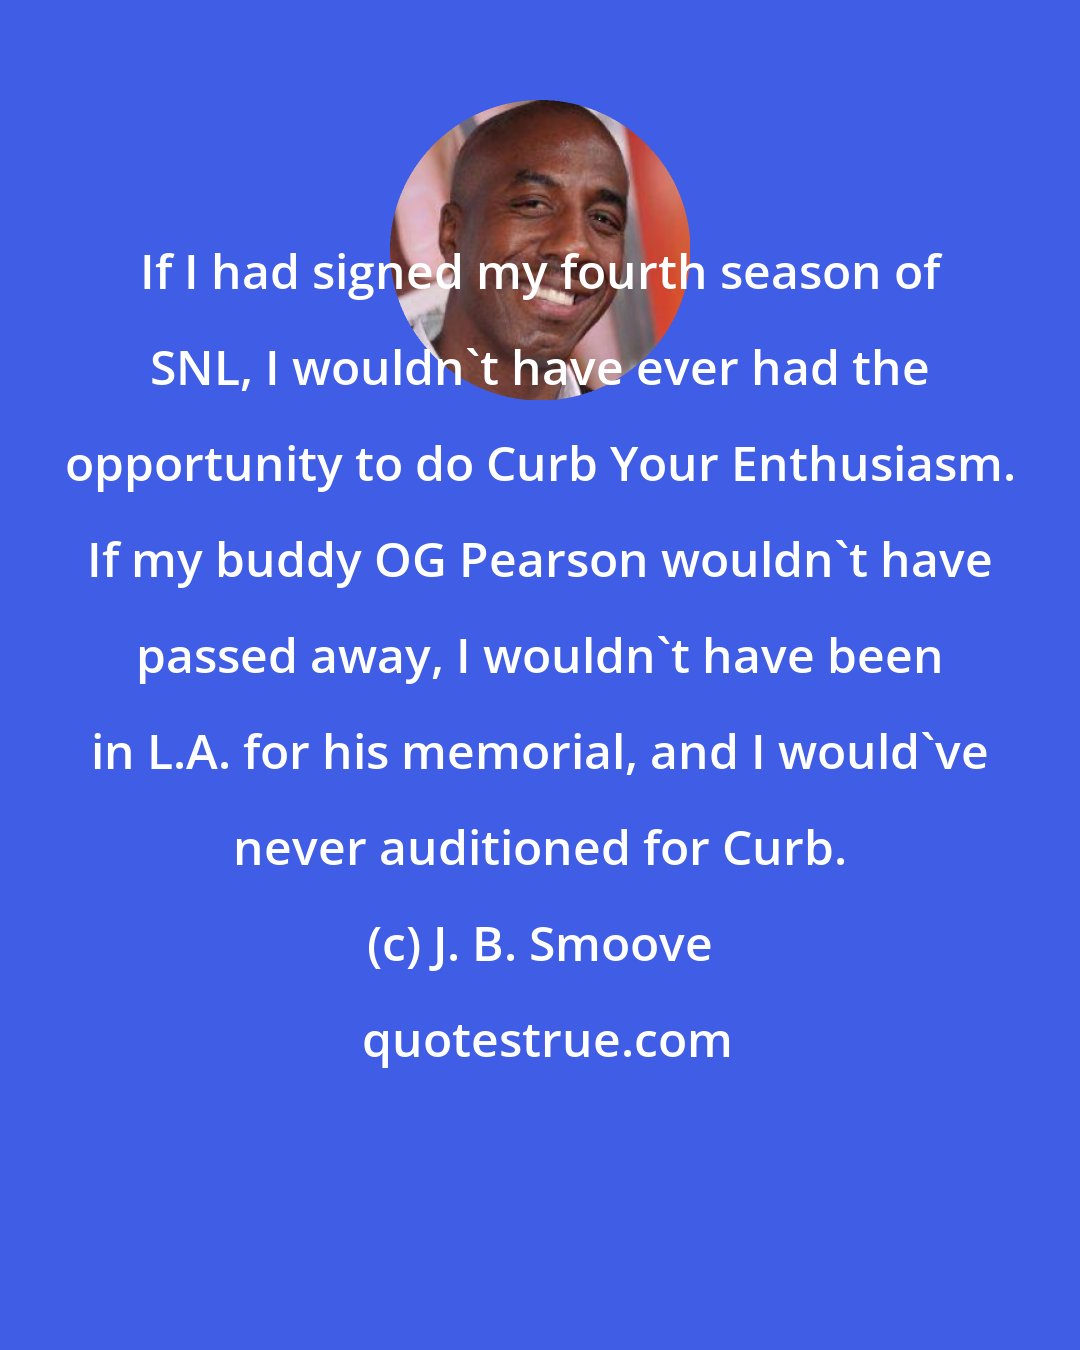 J. B. Smoove: If I had signed my fourth season of SNL, I wouldn't have ever had the opportunity to do Curb Your Enthusiasm. If my buddy OG Pearson wouldn't have passed away, I wouldn't have been in L.A. for his memorial, and I would've never auditioned for Curb.